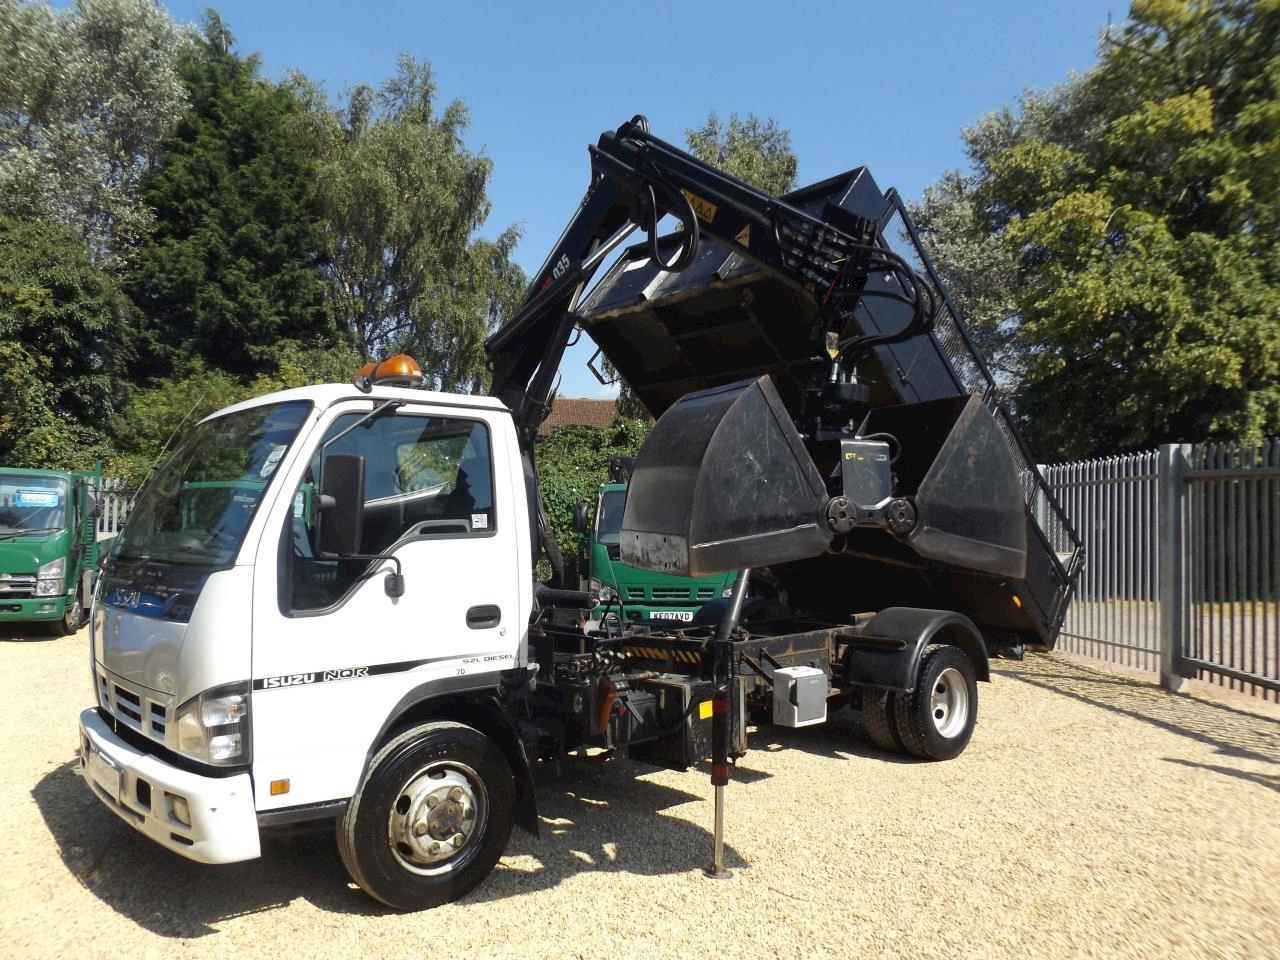 Nqr Tipper with Crane and Bucket Grab - 7.5T Manual Diesel